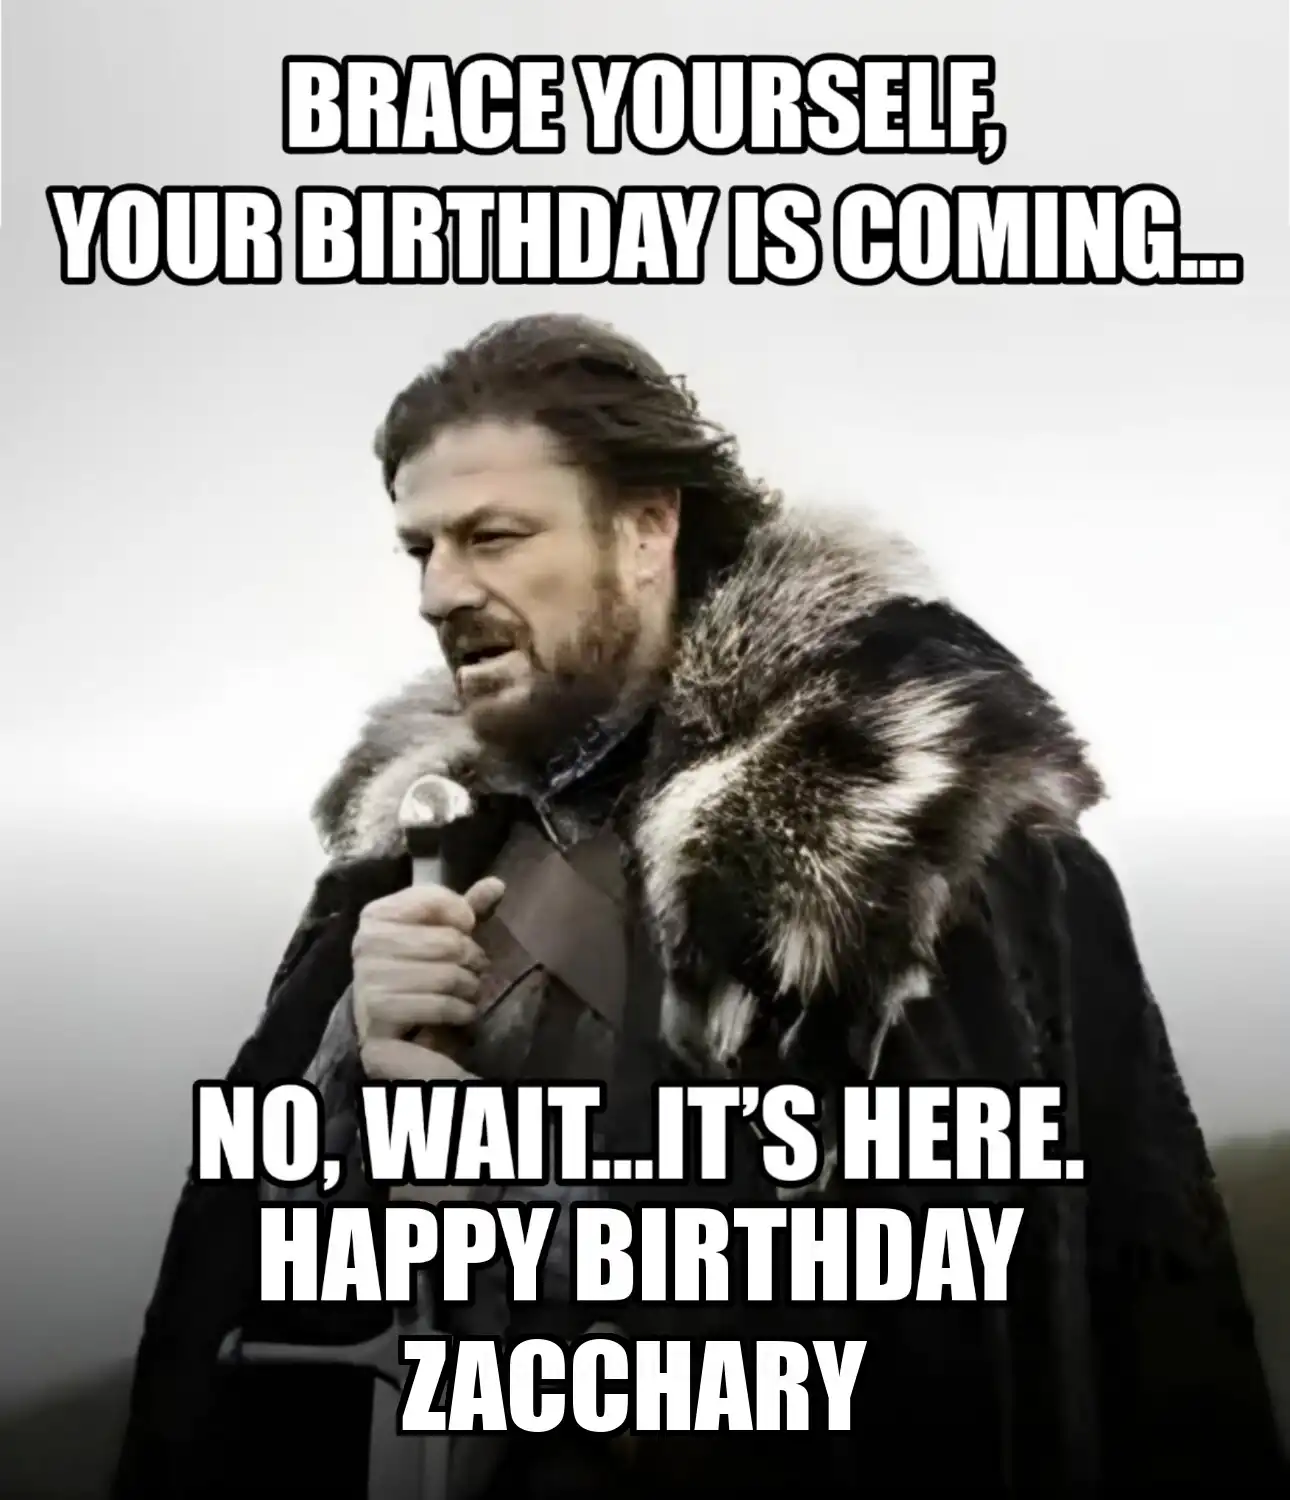 Happy Birthday Zacchary Brace Yourself Your Birthday Is Coming Meme